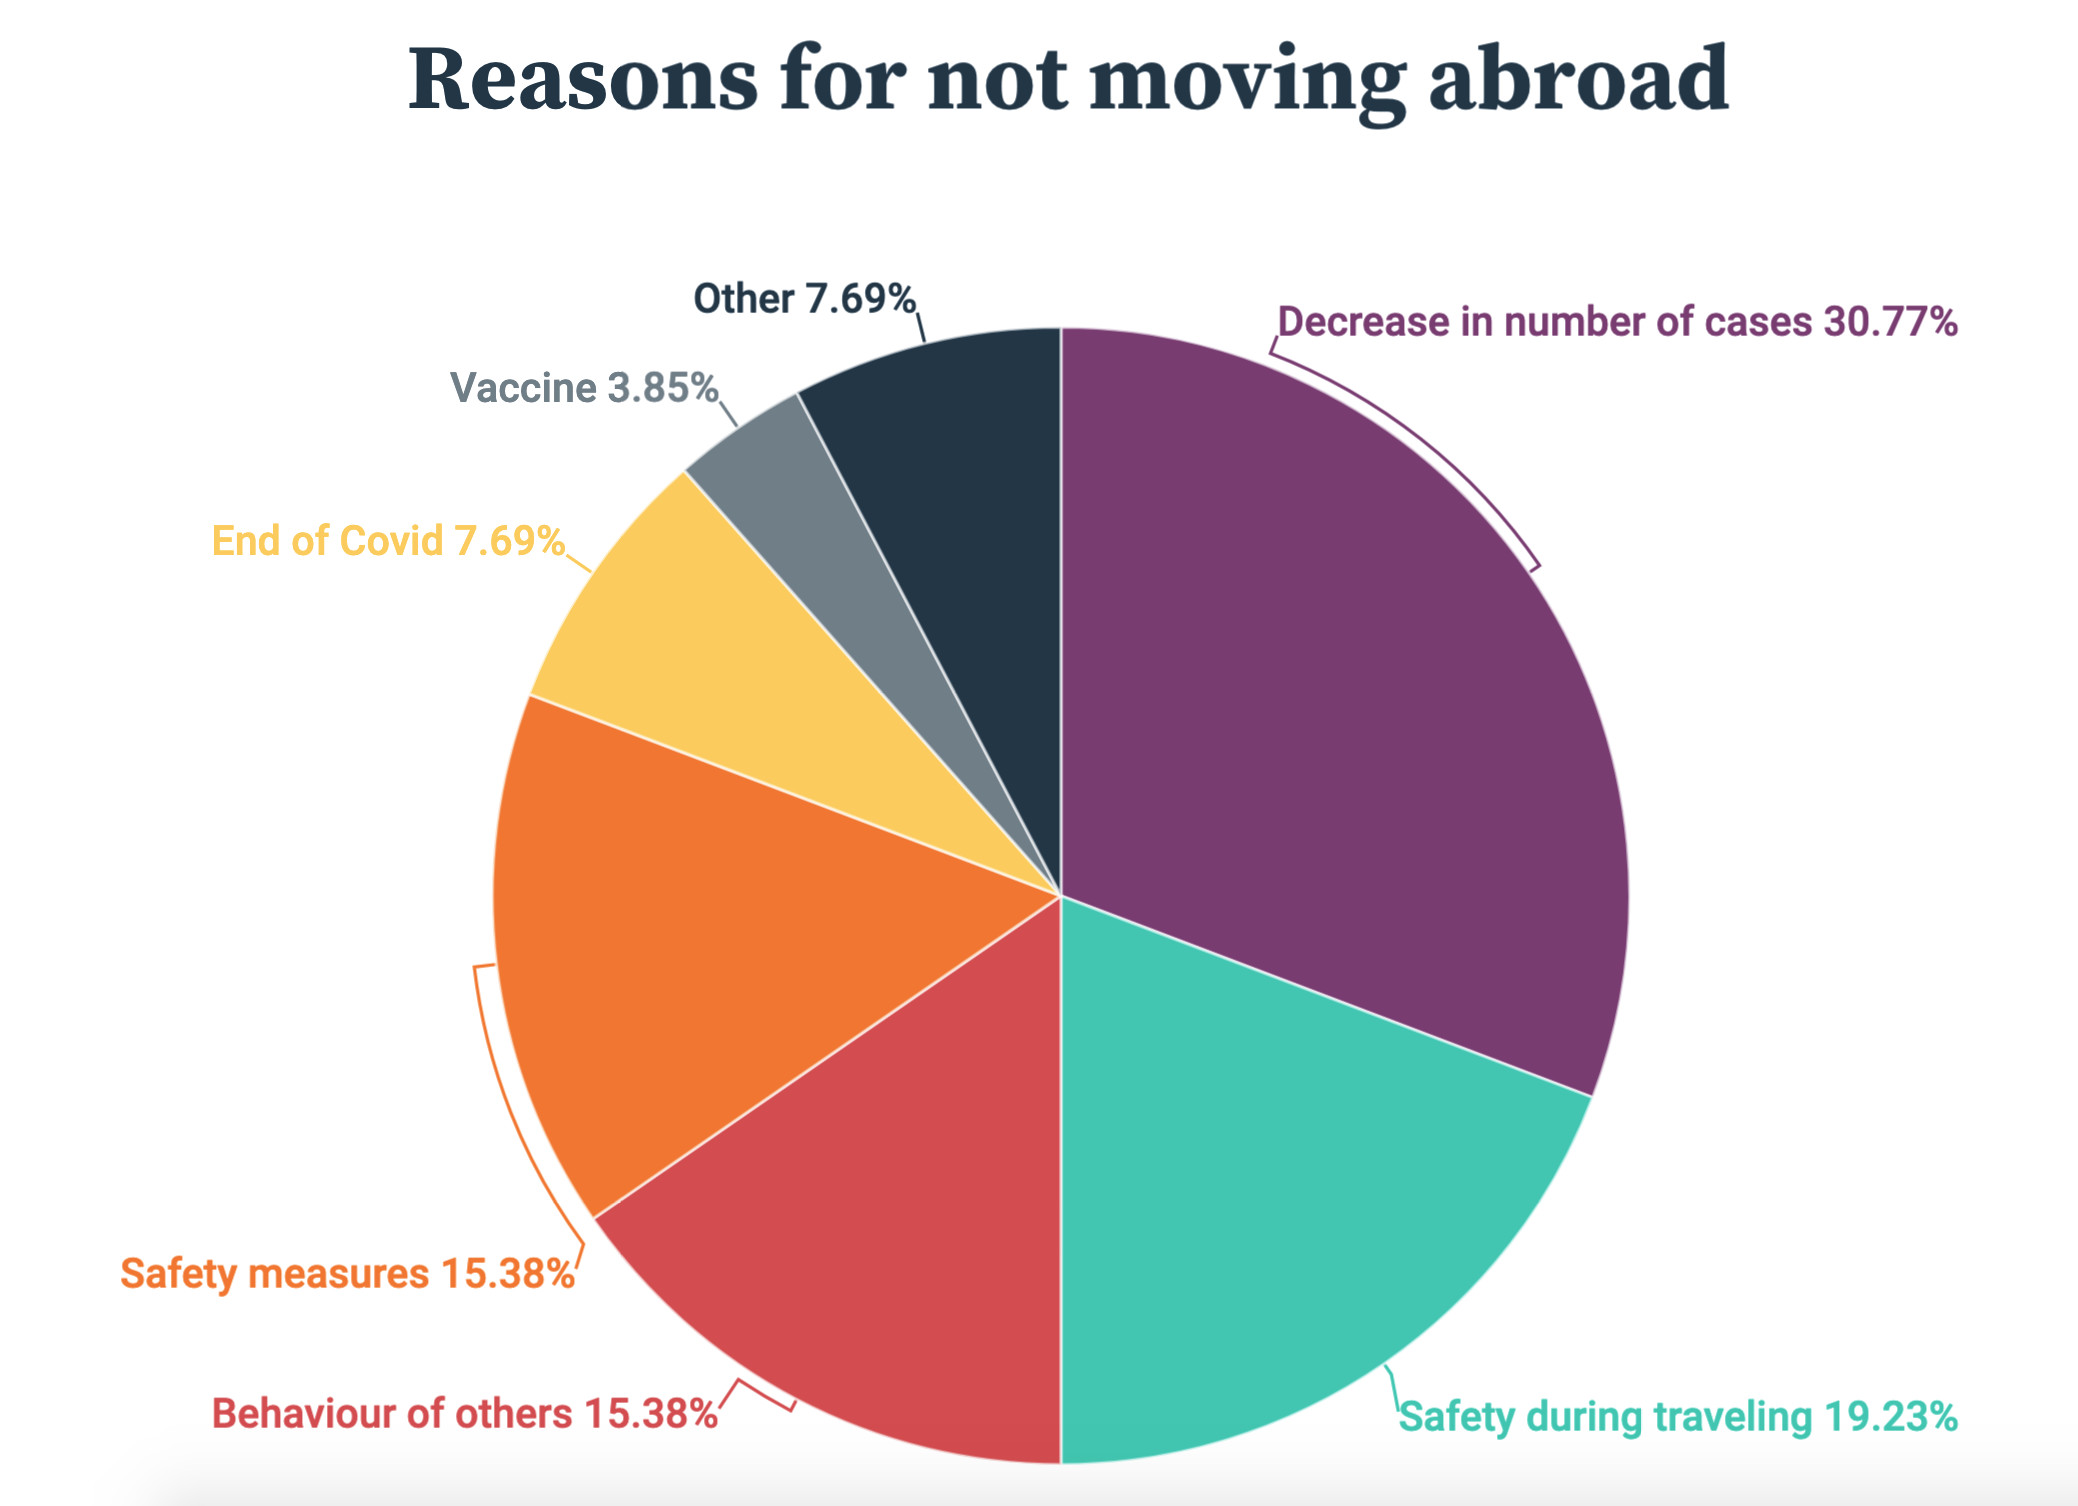 HousingAnywhere Information Reasons For Not Moving Abroad Survey September 2020